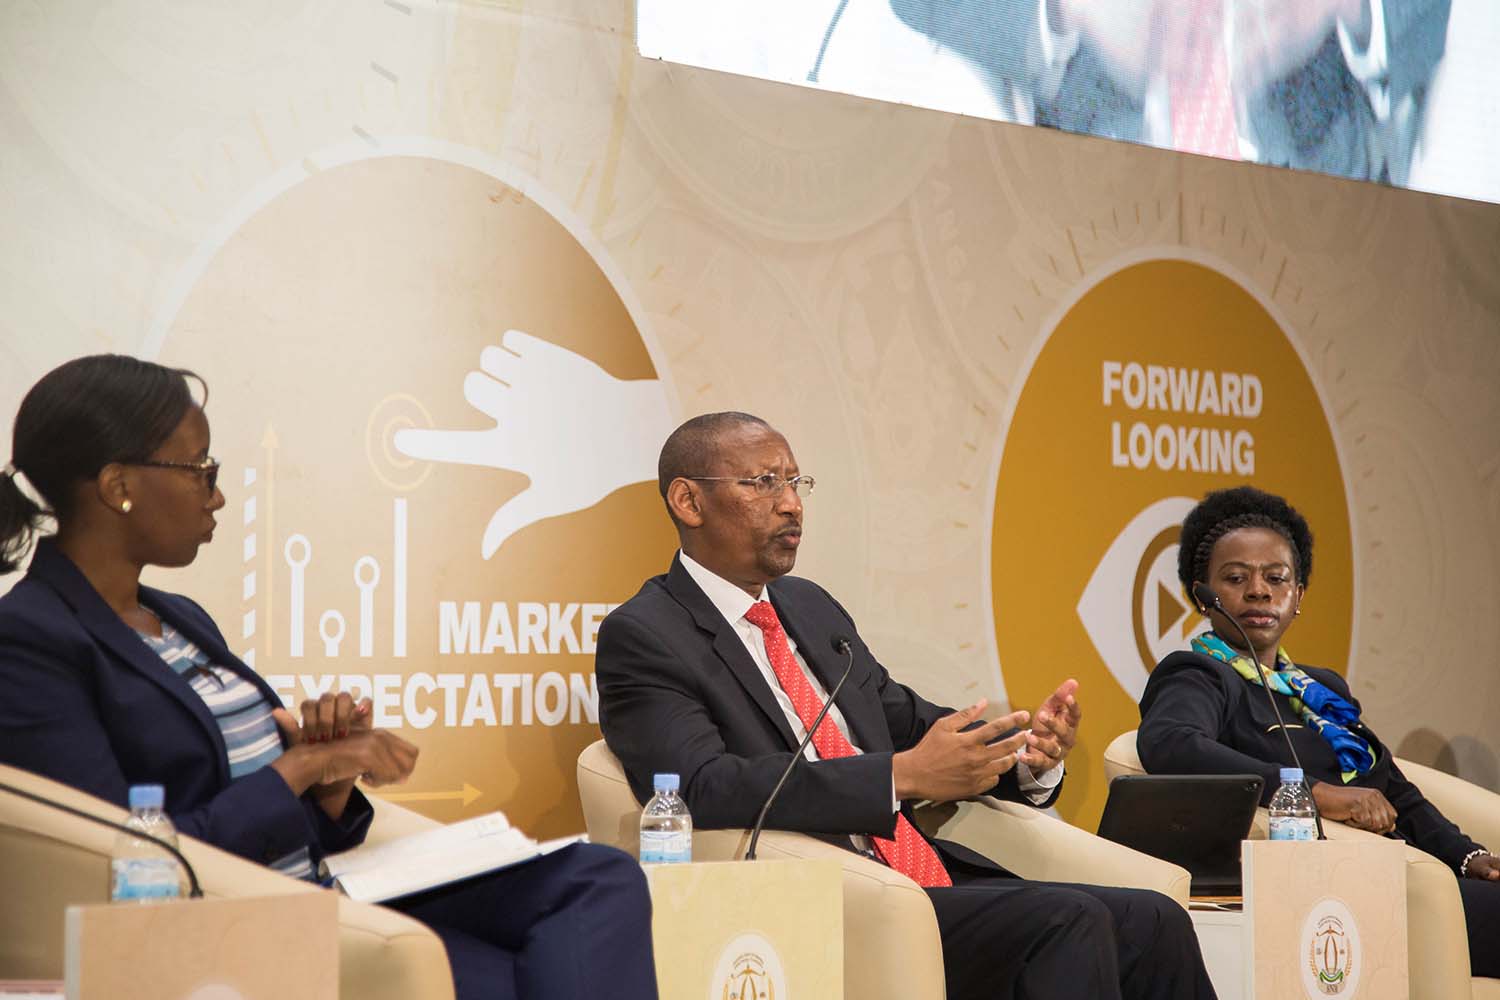 Central bank governor John Rwangombwa (centre) speaks during the Monetary Policy and Financial Stability Statement presentation as Monique Nsanzabaganwa, Vice Governor (right) and Peace Uwase, Director General of the Financial Stability at BNR, look on at Kigali Convention Centre yesterday. Nadege Imbabazi.